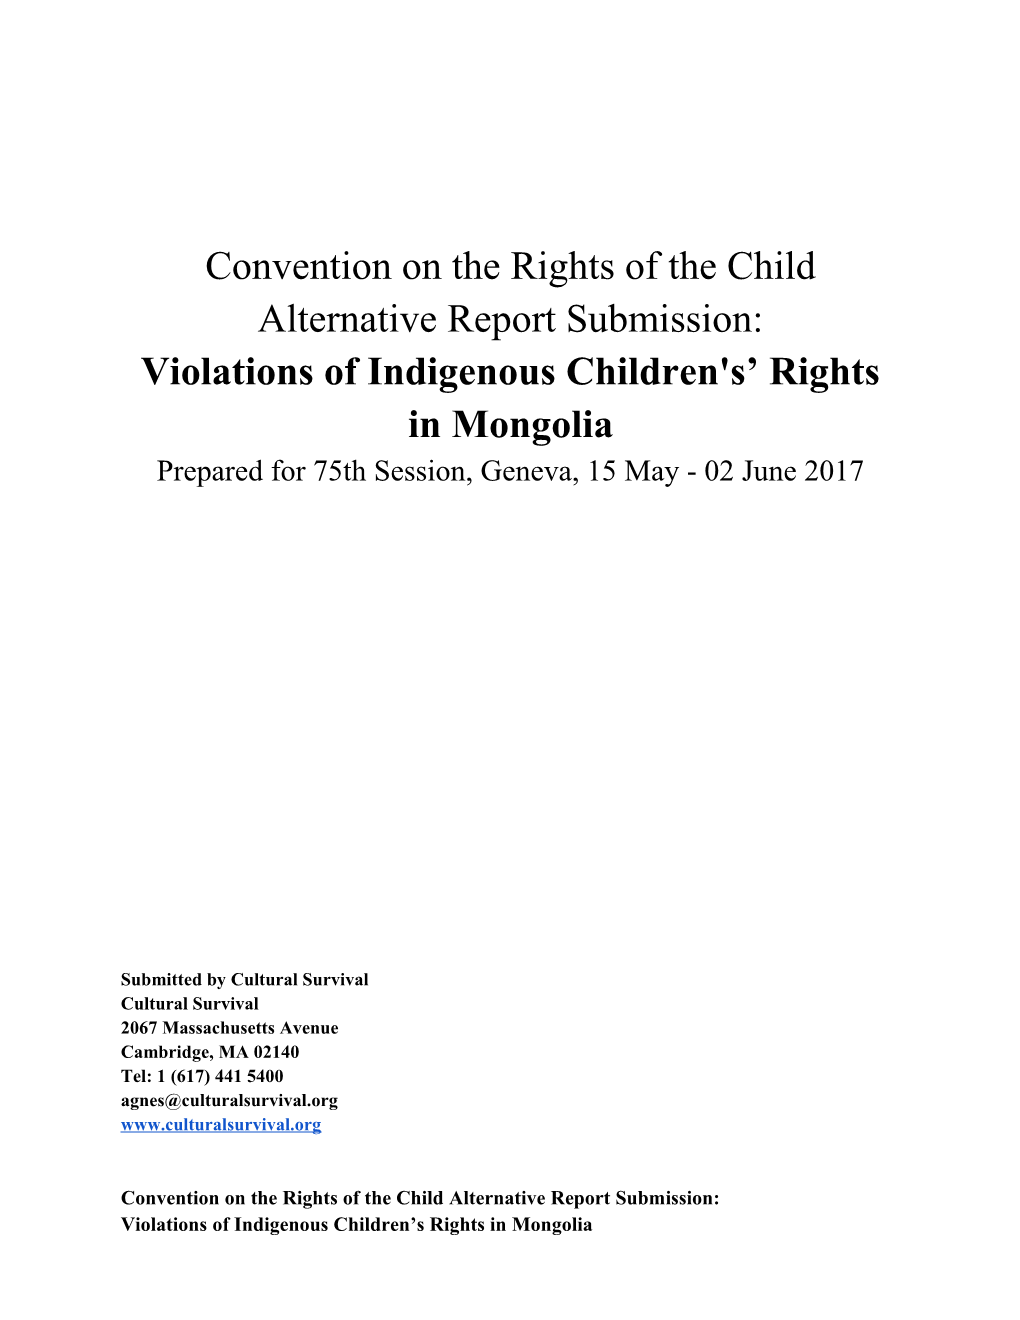 Violations of Indigenous Children's Rights